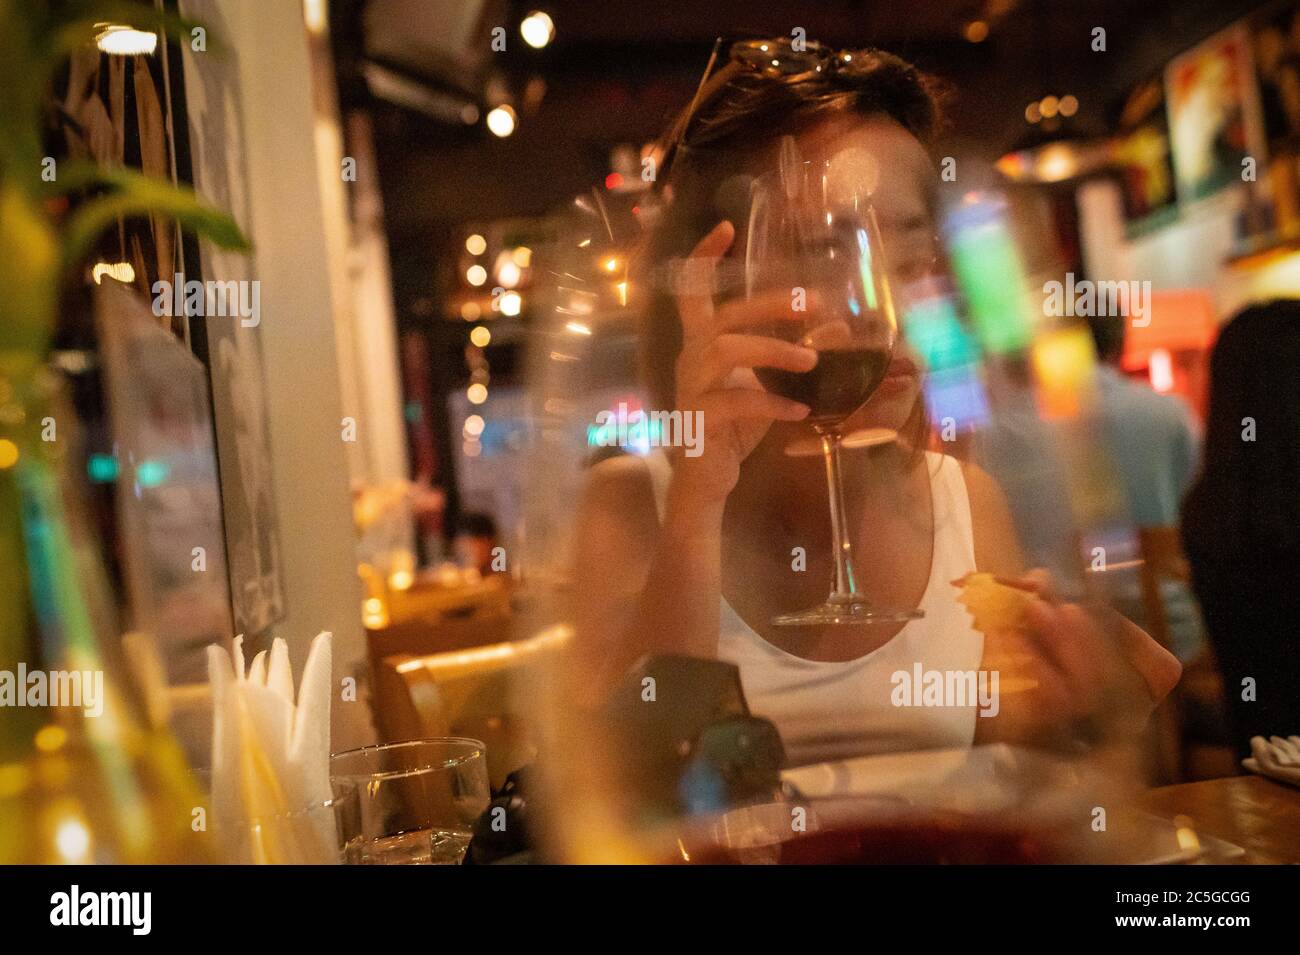 Young Vietnamese woman looking through her glass of wine in a bar, Ho Chi Minh City, Vietnam. Stock Photo